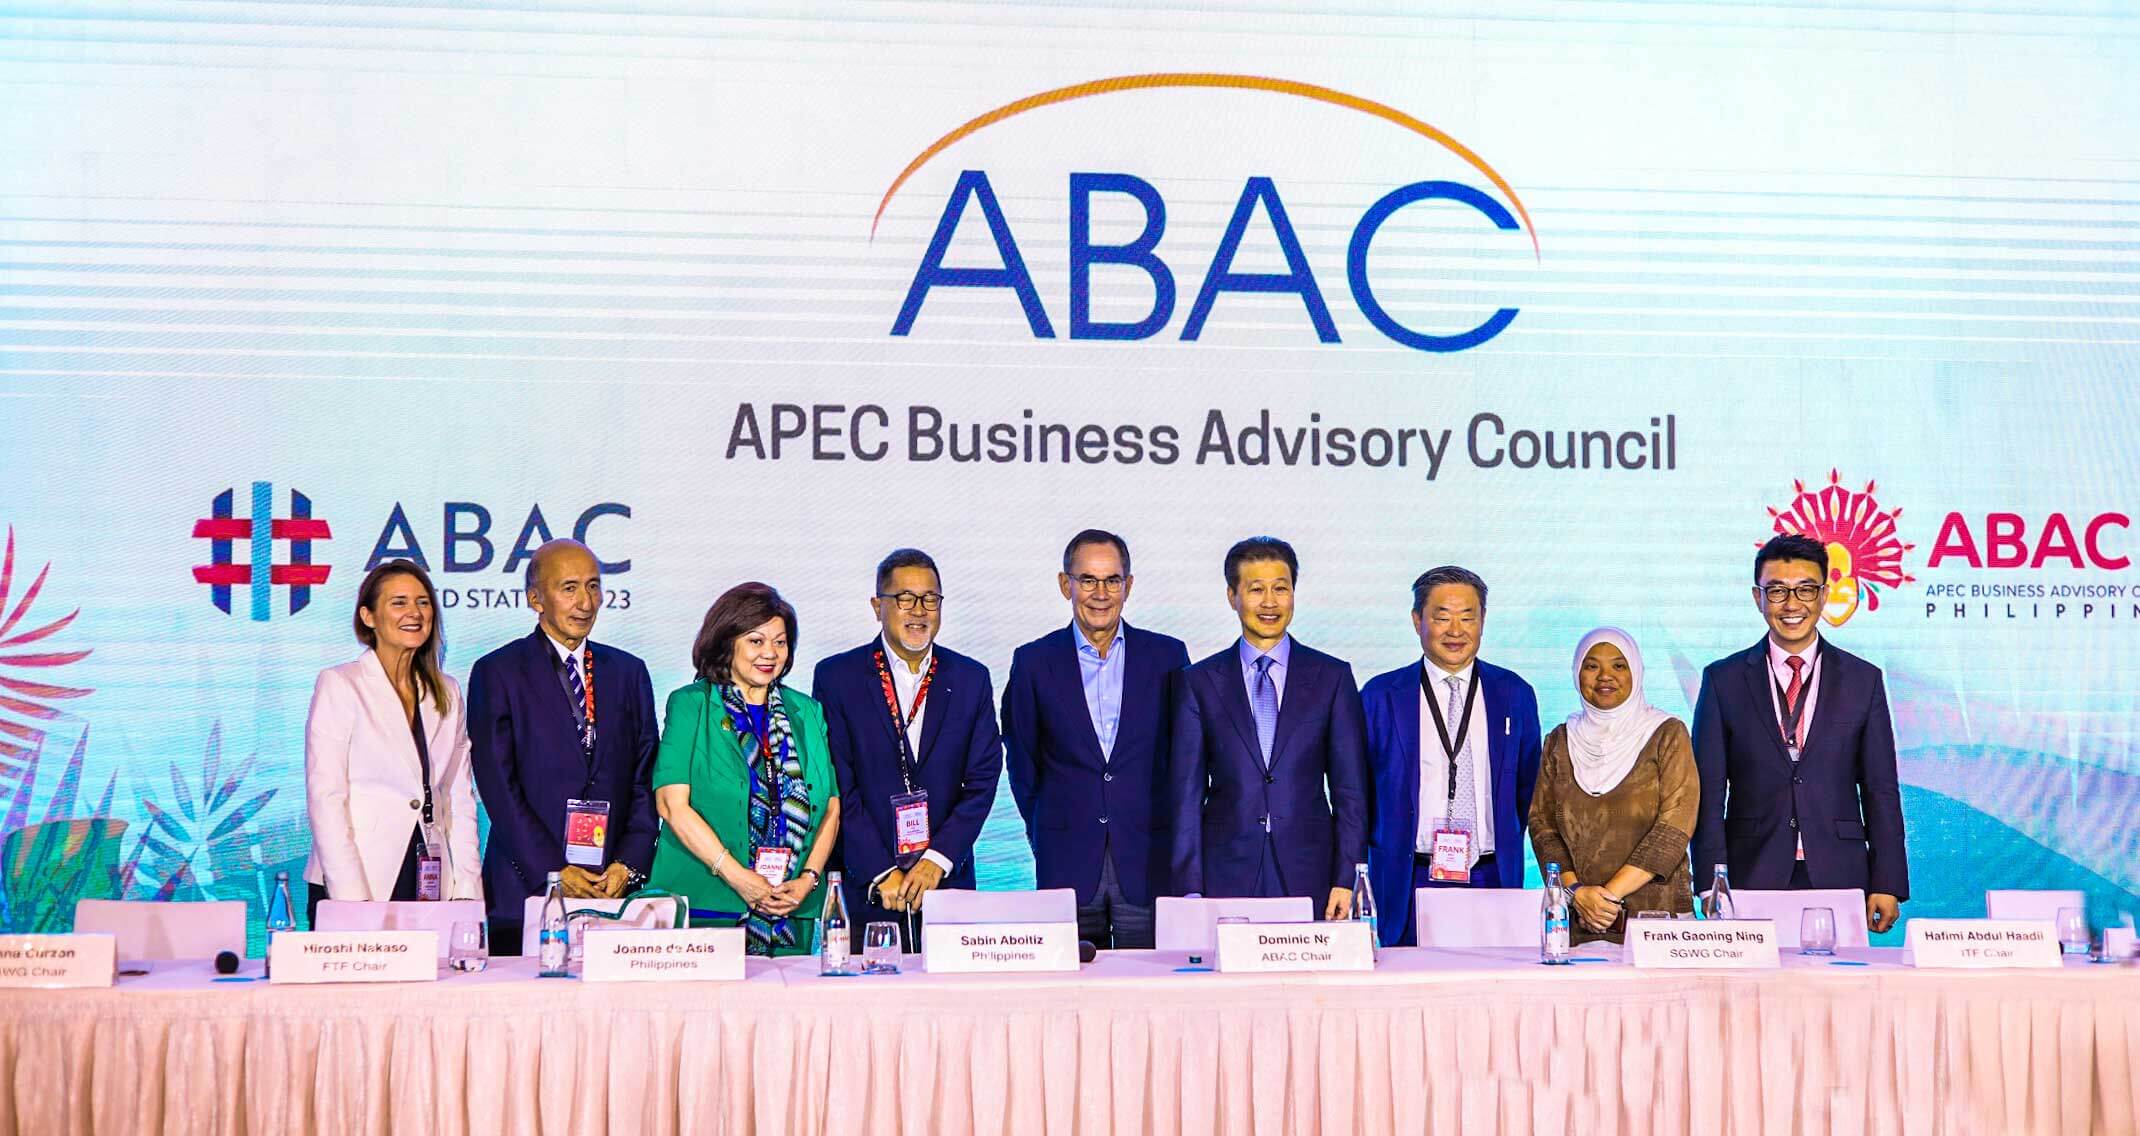 VERY SUCCESSFUL. That’s how ABAC 2023 Chair Dominic Ng (6th from left( described the Asia-Pacific Economic Cooperation (APEC) Business Advisory Council (ABAC) III meeting in Cebu. With him during the press conference at the close of the event are (from left) Anna Curzon, EIWG Chair; Hiroshi Nakaso, FTF Chair; Joanne de Asis, ABAC Philippines Member; Guillermo Luz, ABAC Philippines Member; Sabin Aboitiz, ABAC Sustainable Growth Working Group (SGWG) Vice Chair; Frank Gaoning Ning, SGWG Chair; Hafimi Abdul Haadii, ITF Chair; and Wong Wai Meng, Acting DIWG Chair.